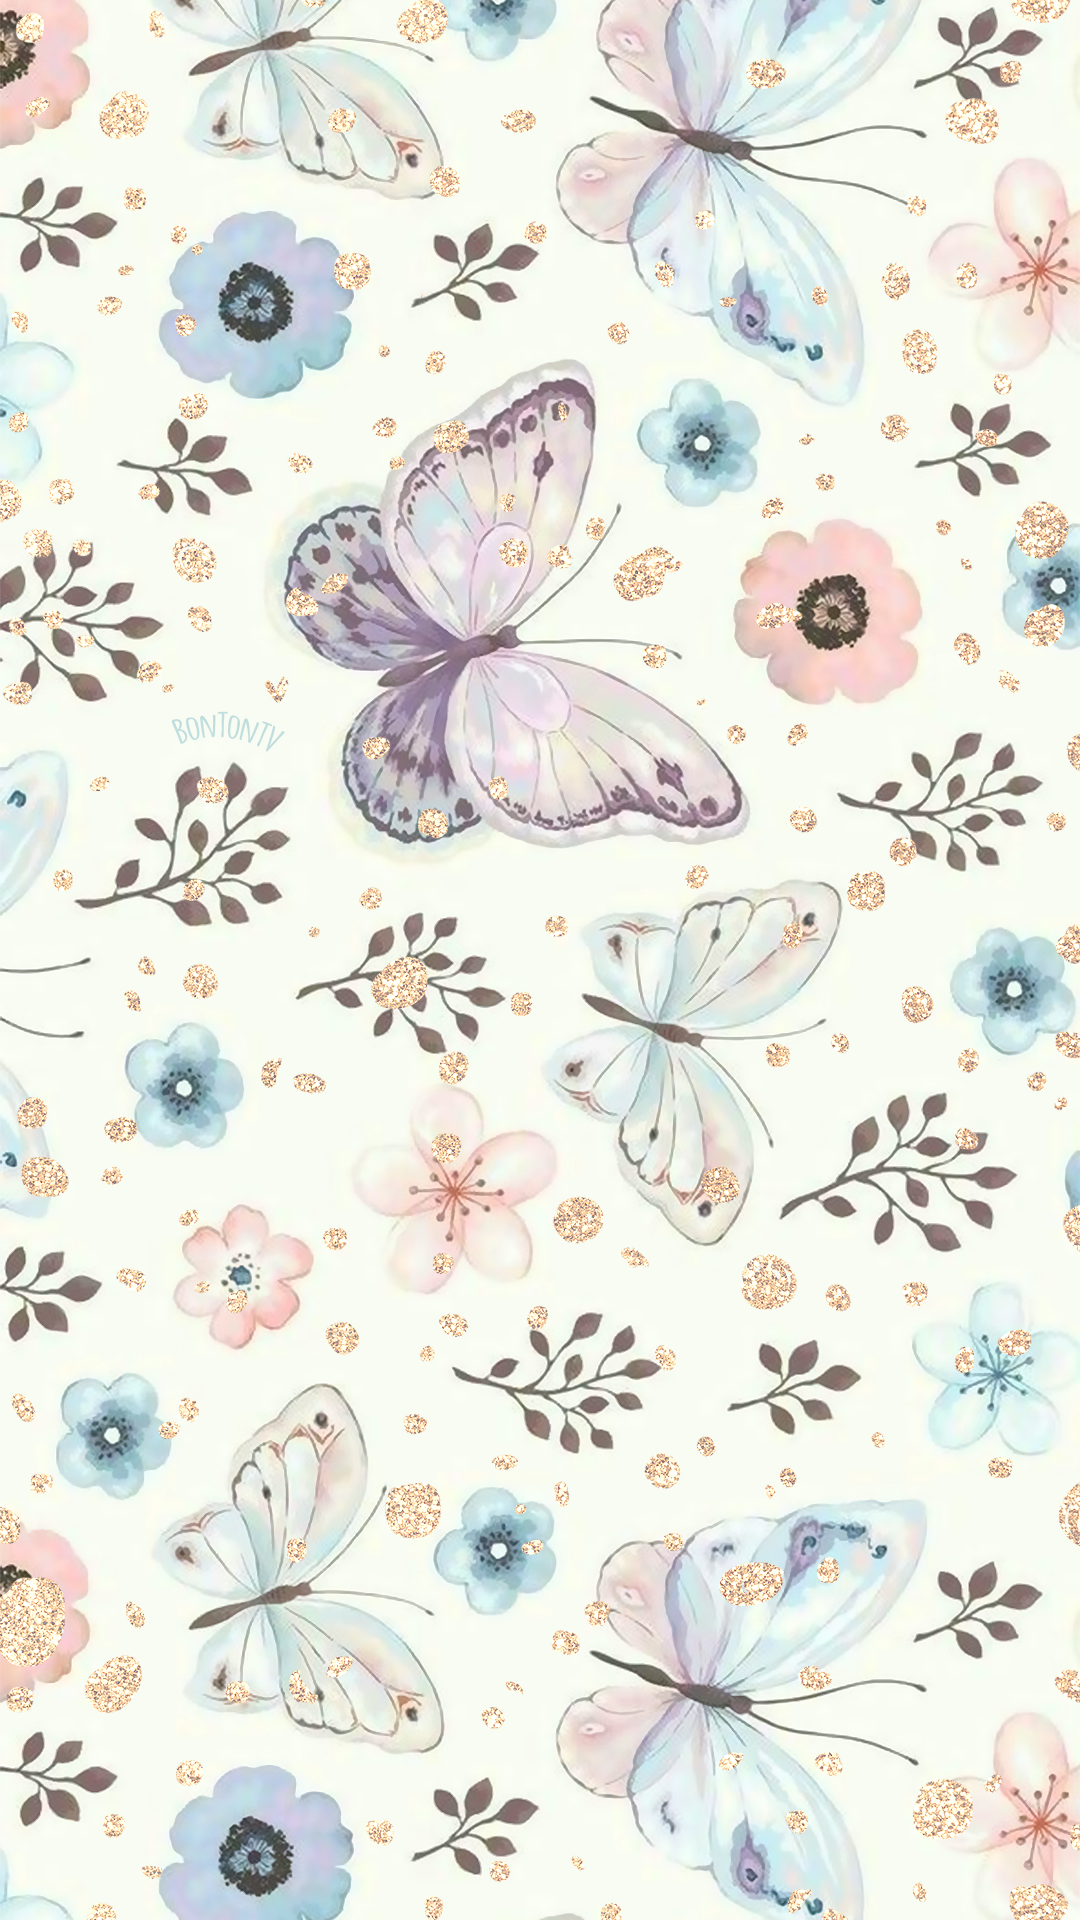 Telefonní tapety Bonton TV Download iPhone, Android. Artsy wallpaper iphone, Cute patterns wallpaper, Butterfly watercolor